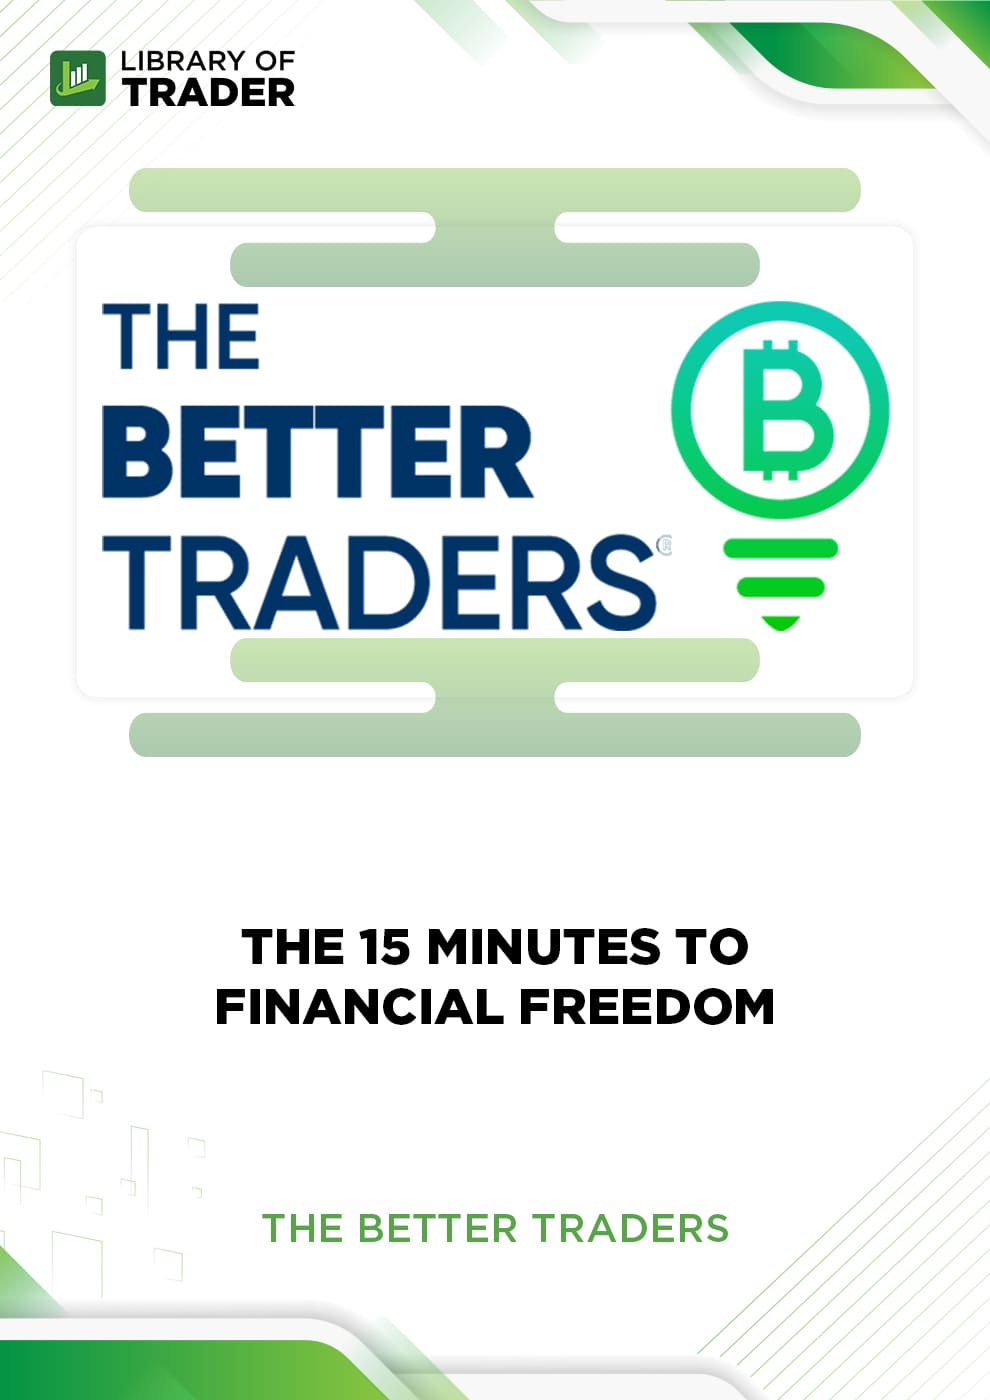 The 15 Minutes to Financial Freedom by The Better Traders